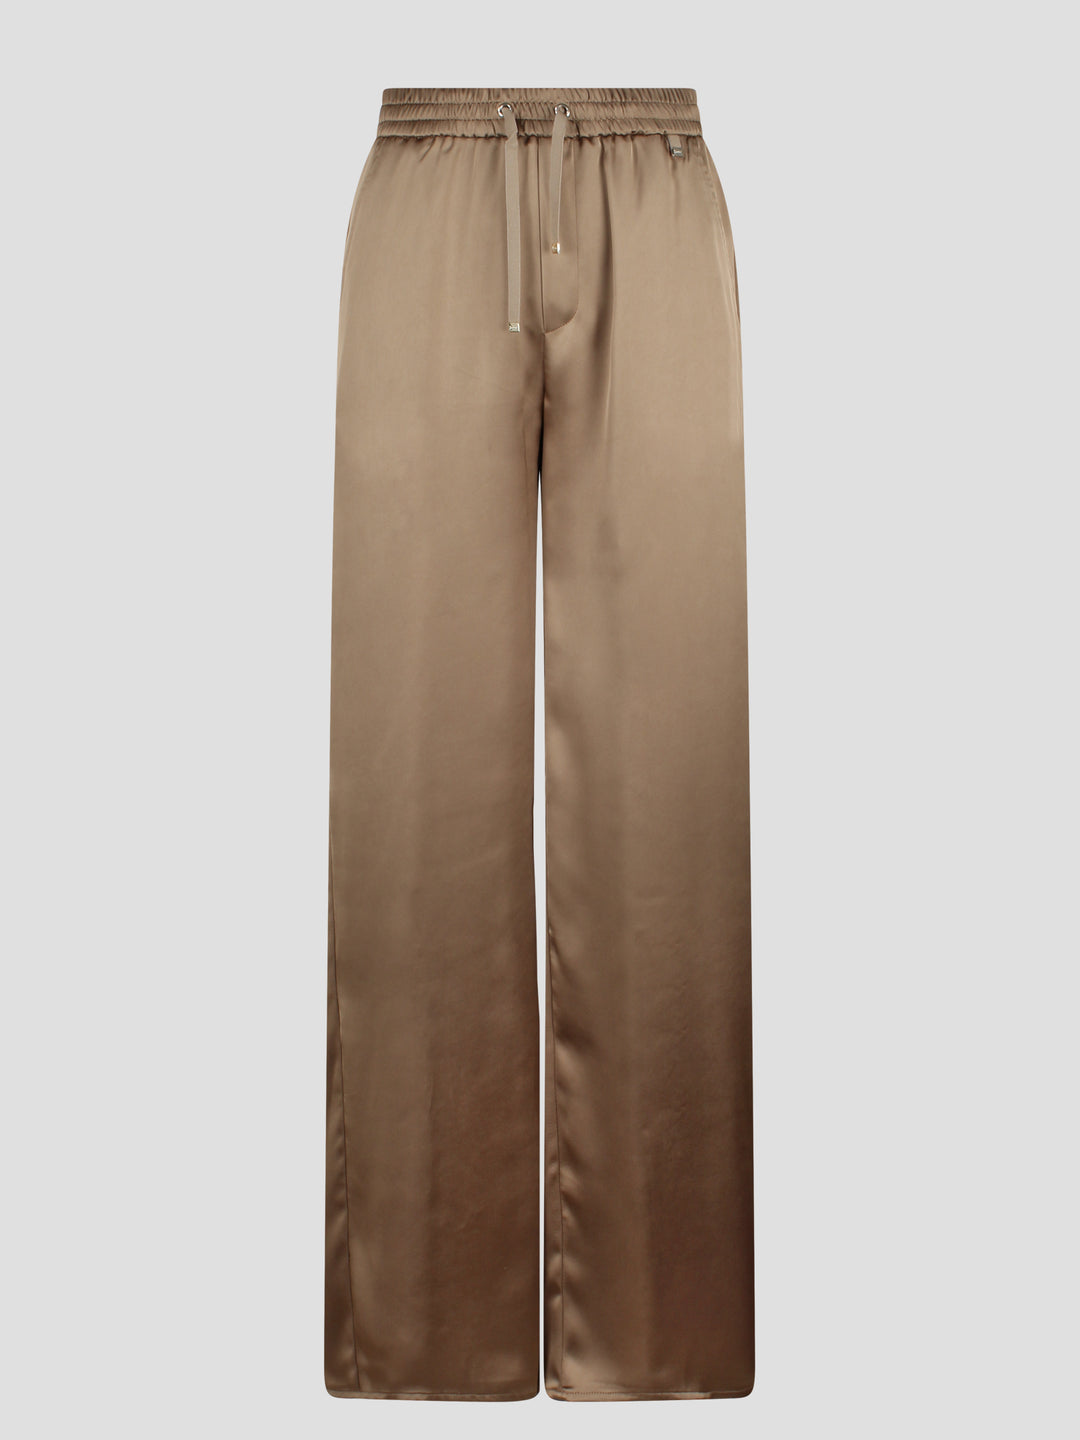 Casual satin trousers